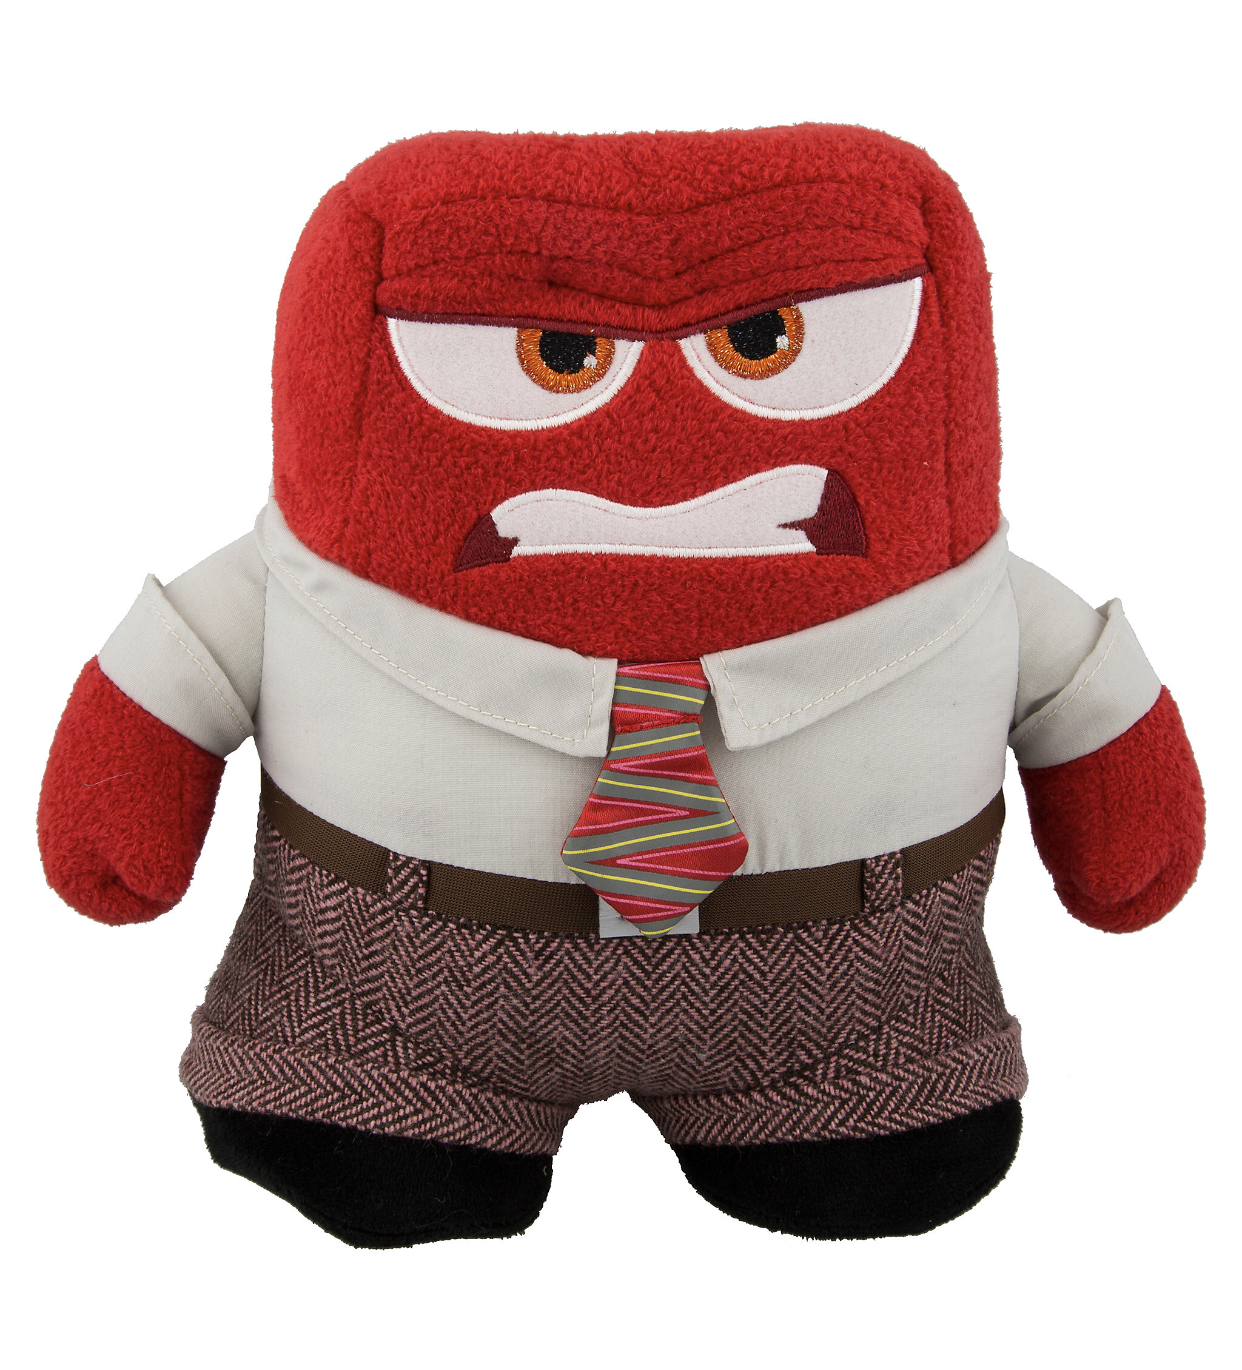 Disney Parks Inside Out Anger Plush 10" New with Tags